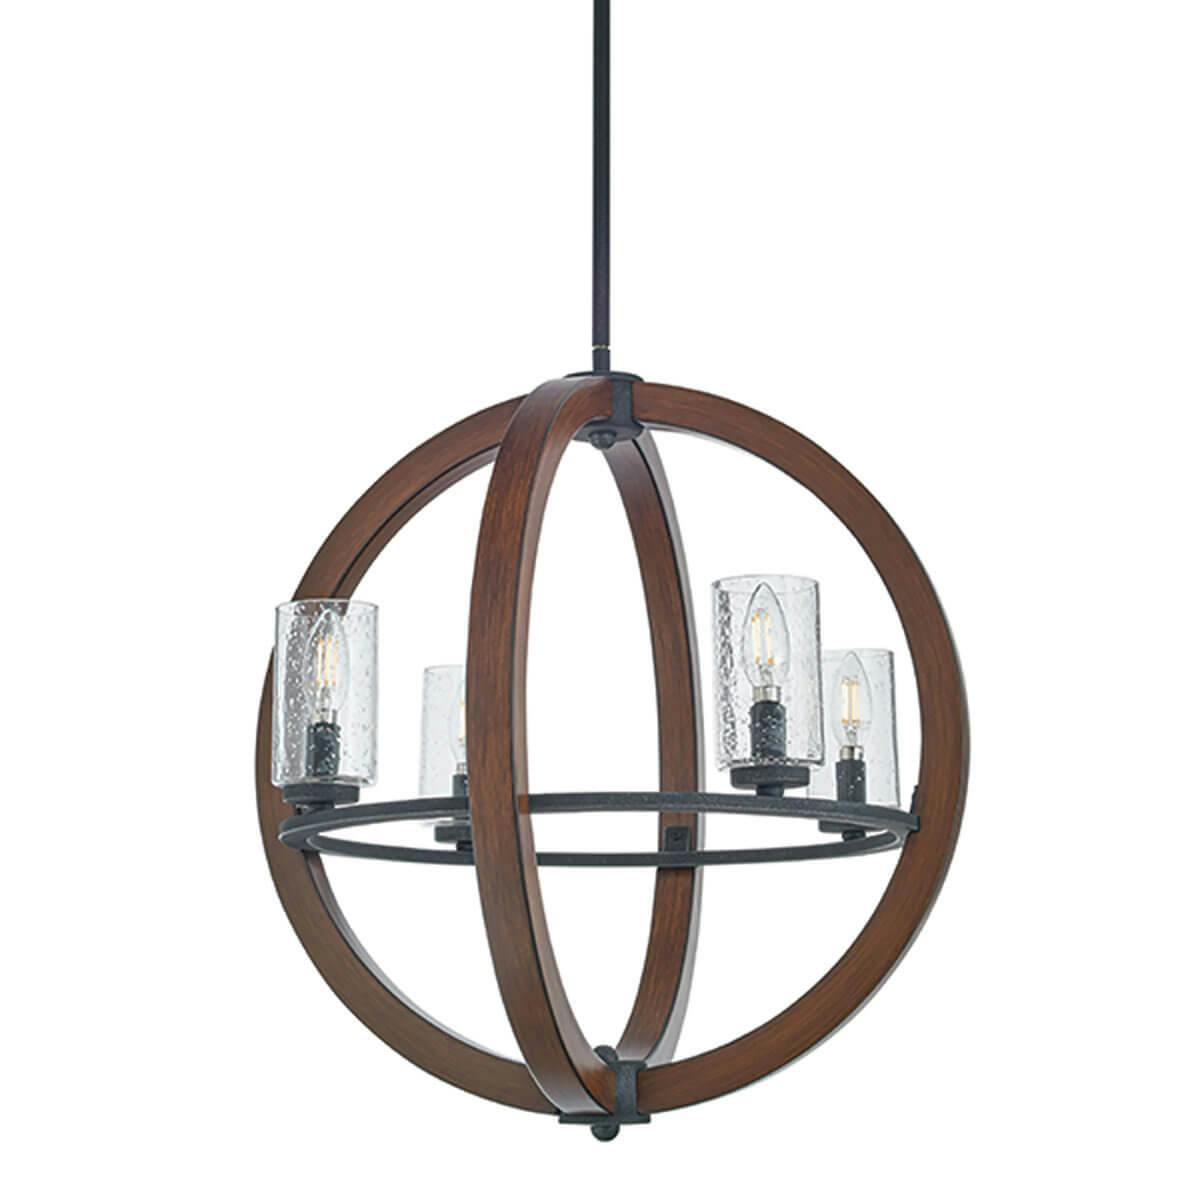 Grand Bank 21.5" Chandelier Auburn Stain without the canopy on a white background